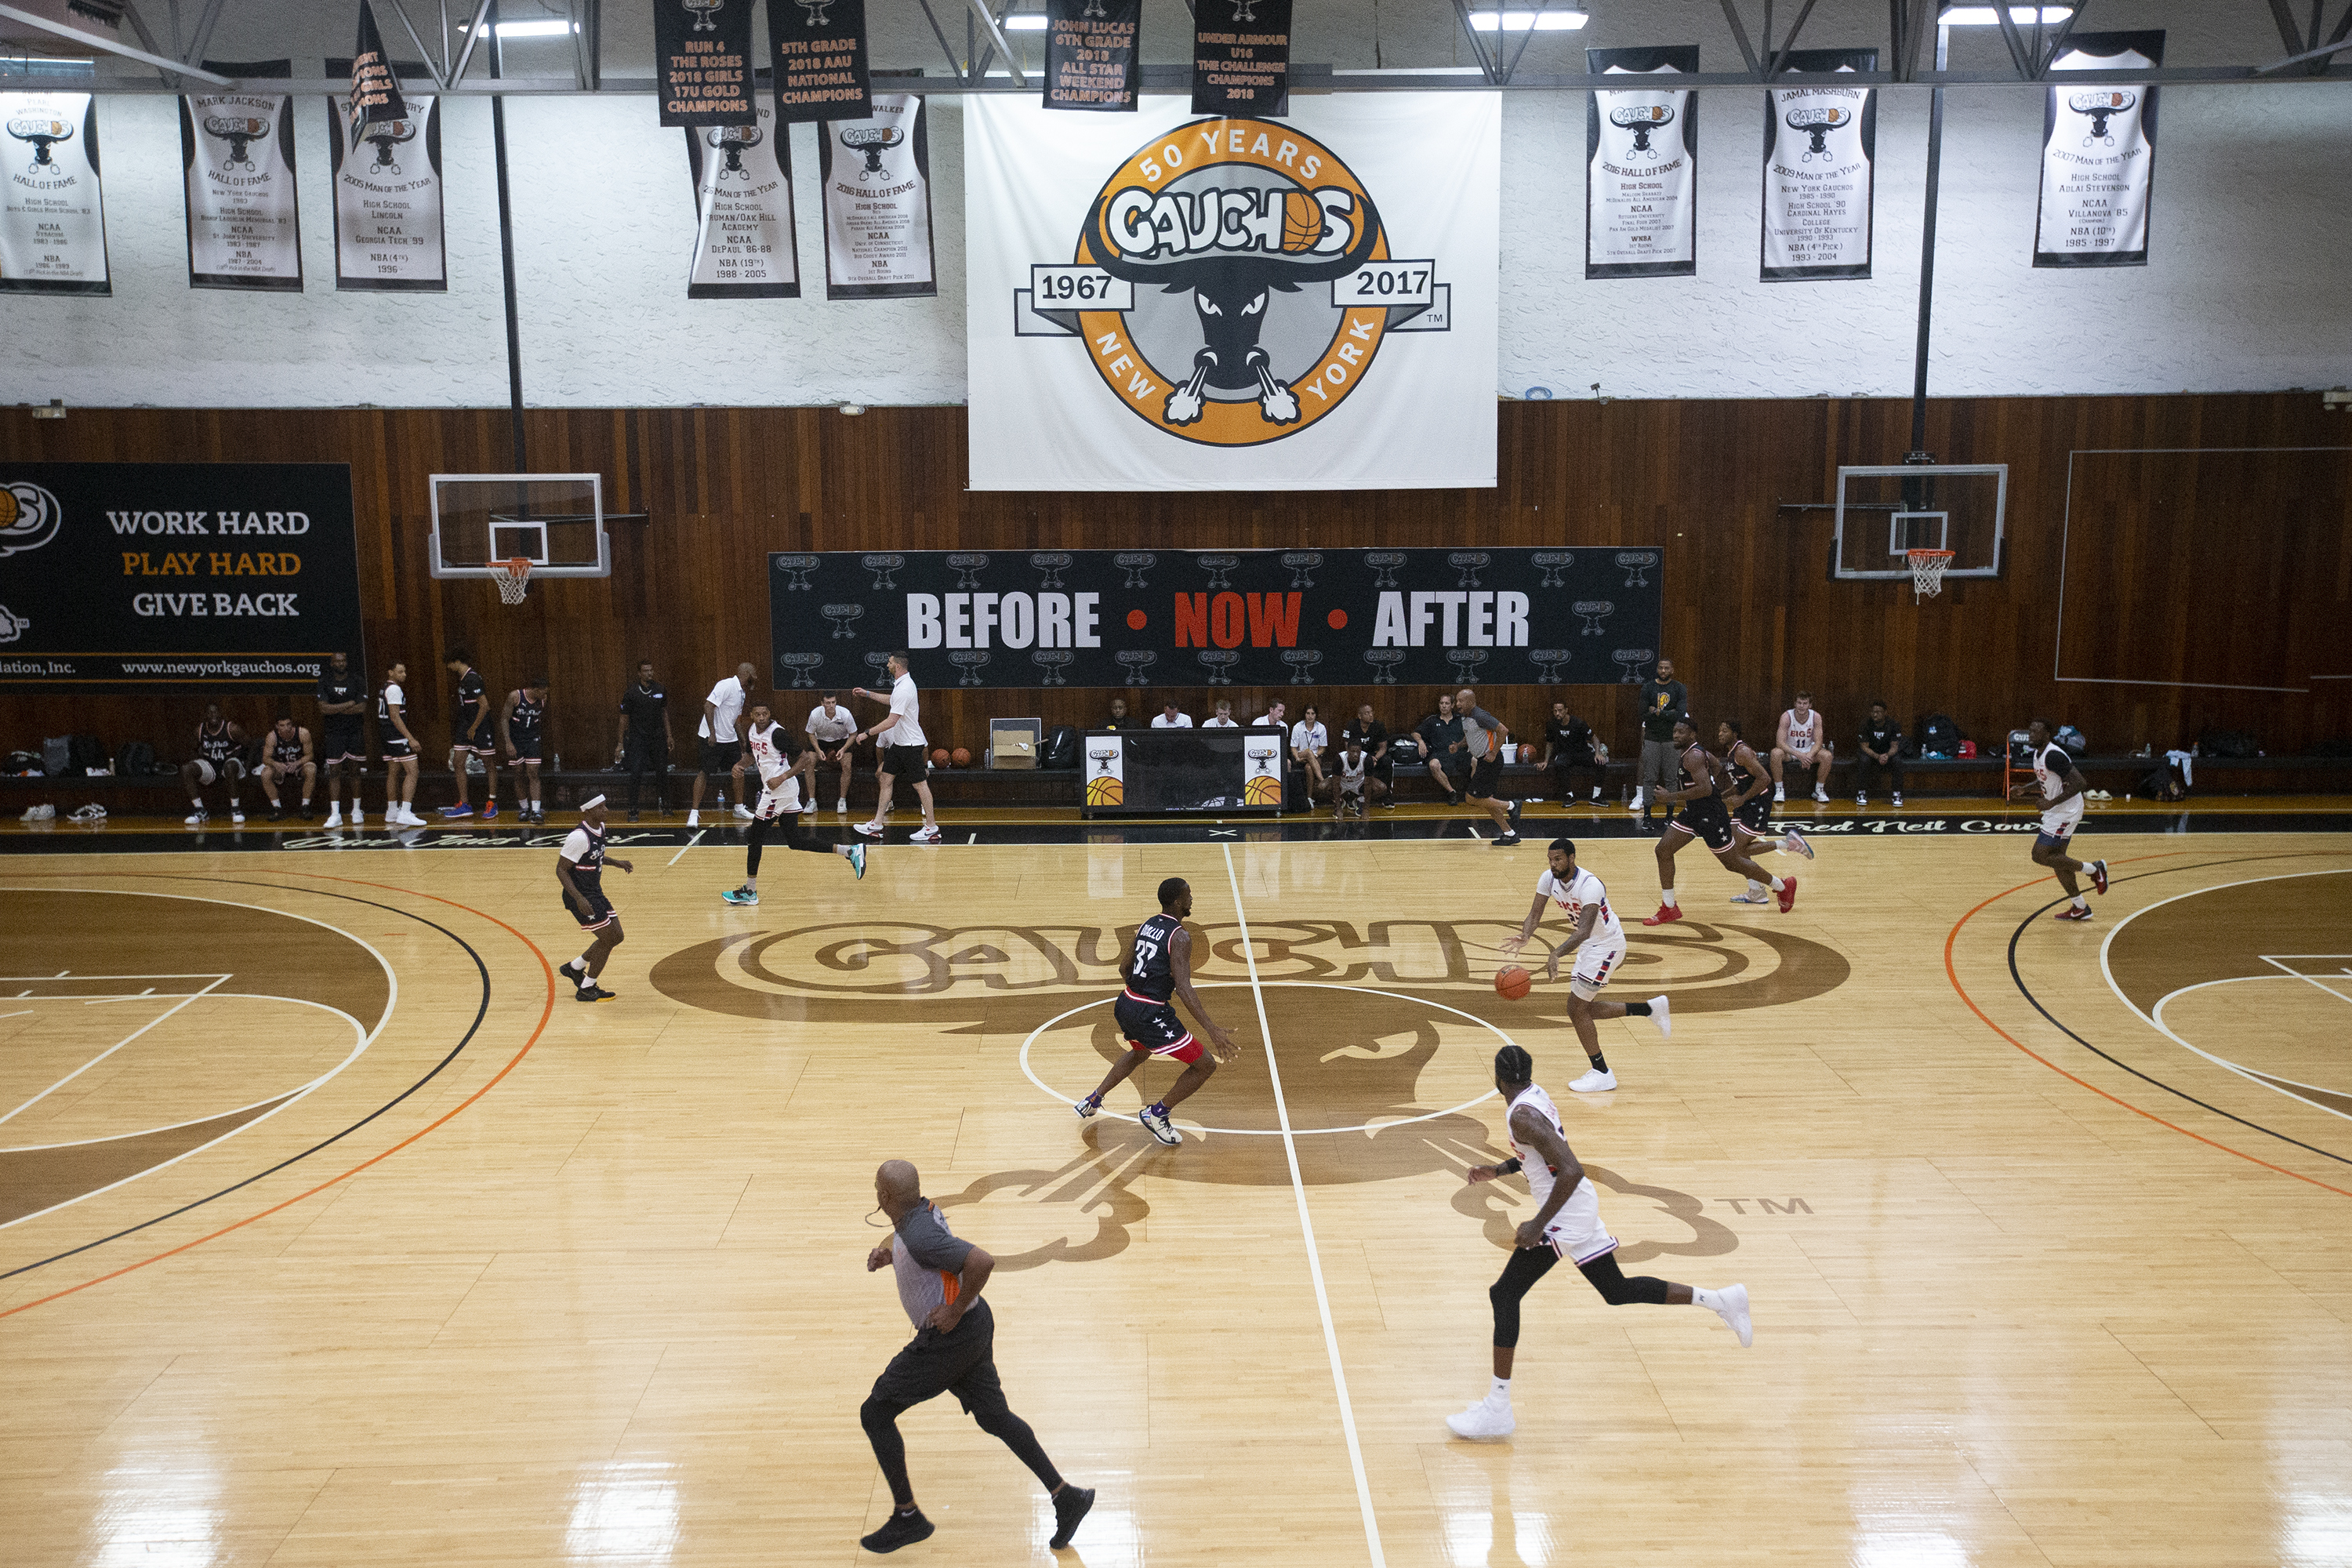 Rained out at New York's Rucker Park, Big 5 alumni win resumed game in  Bronx gym